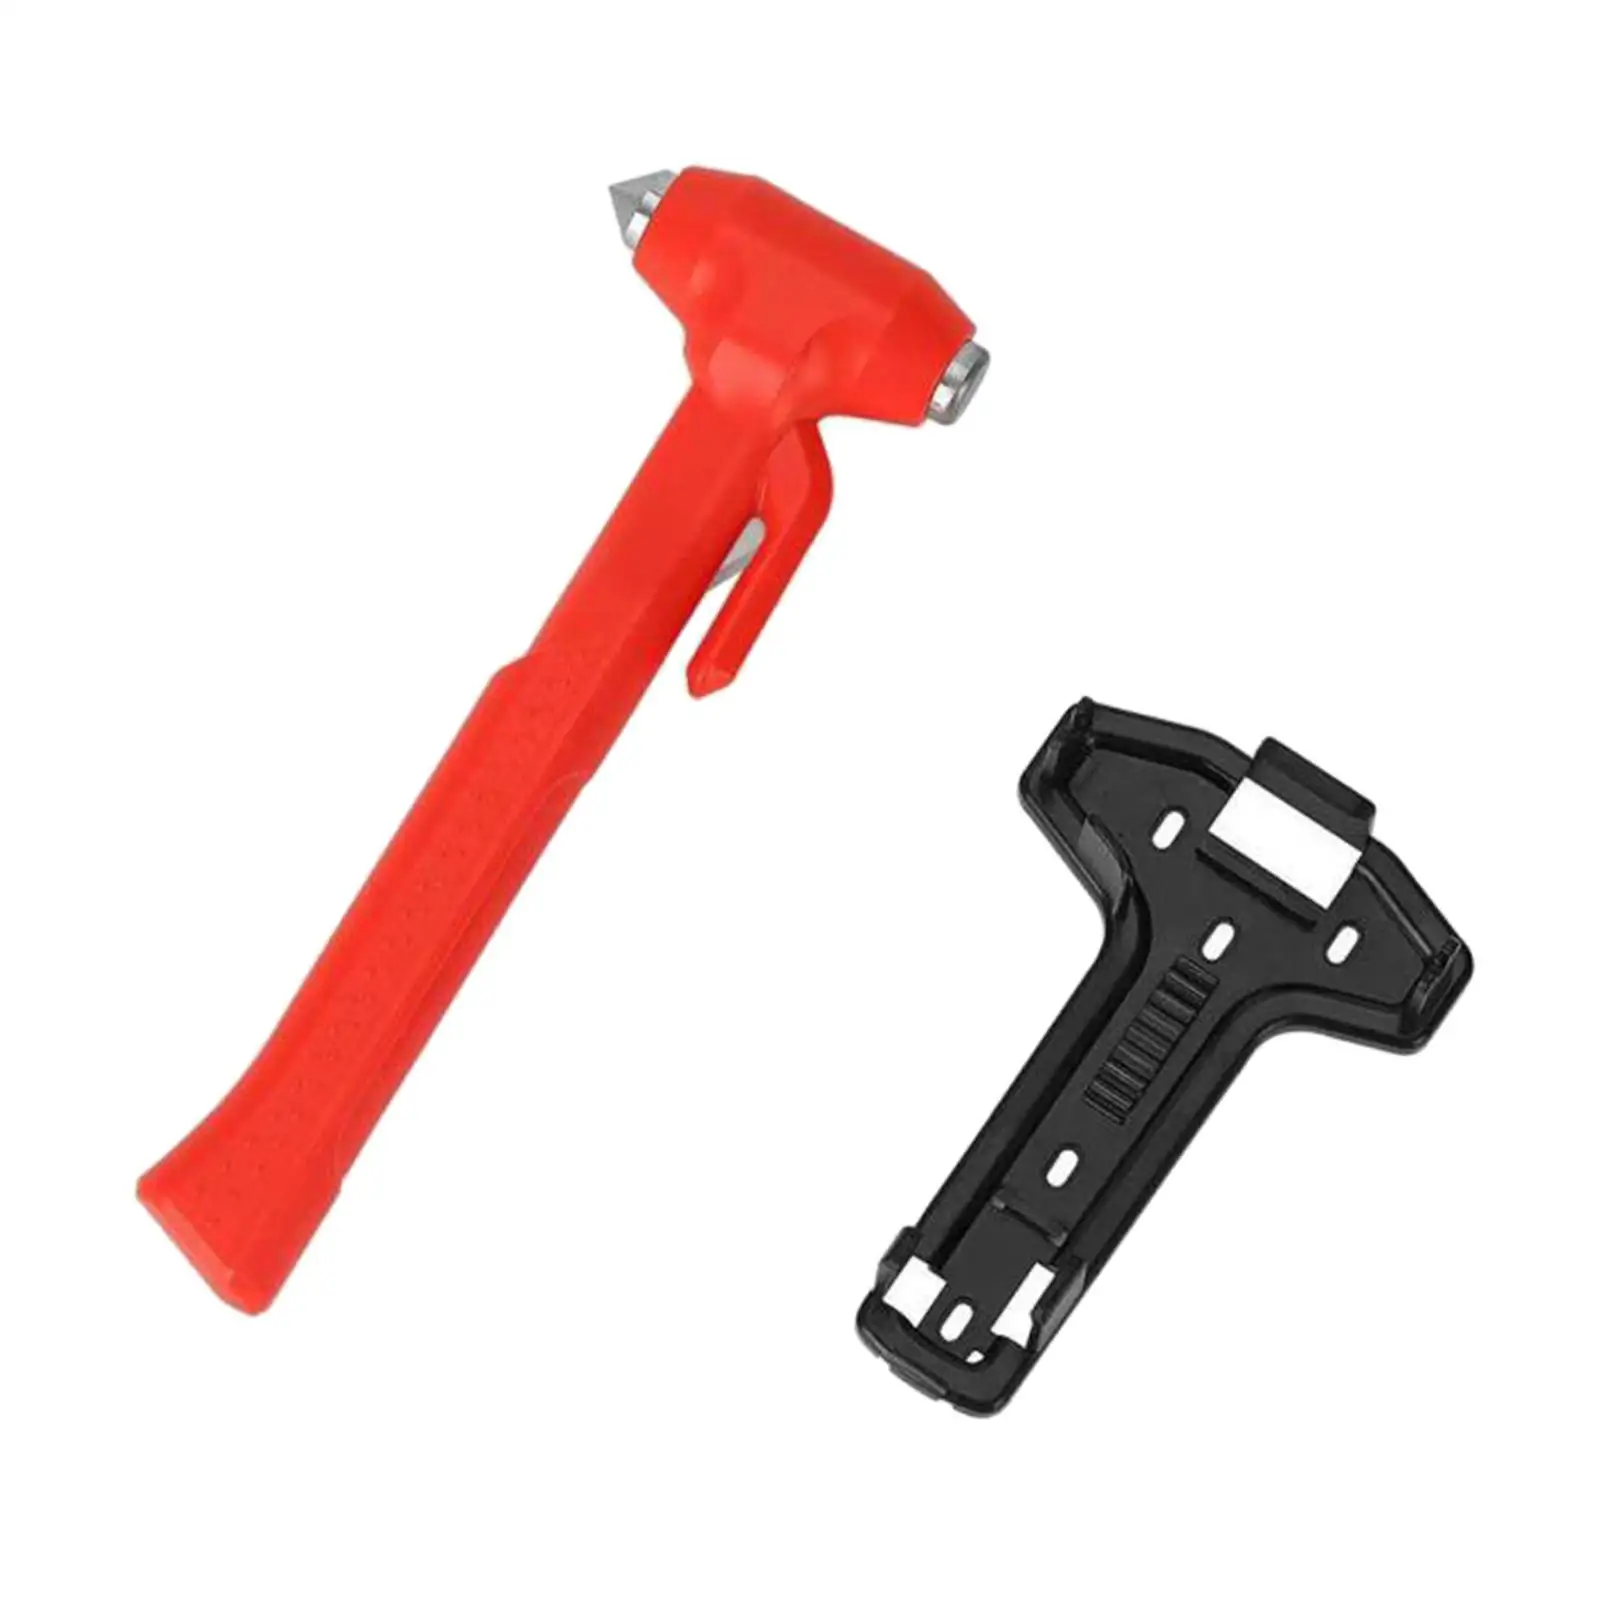 Vehicle Safety Hammer Tool Non Slip Handle Auto Accessories Portable Seat Belt Cutter for Card Vehicles Automotive Bus Red